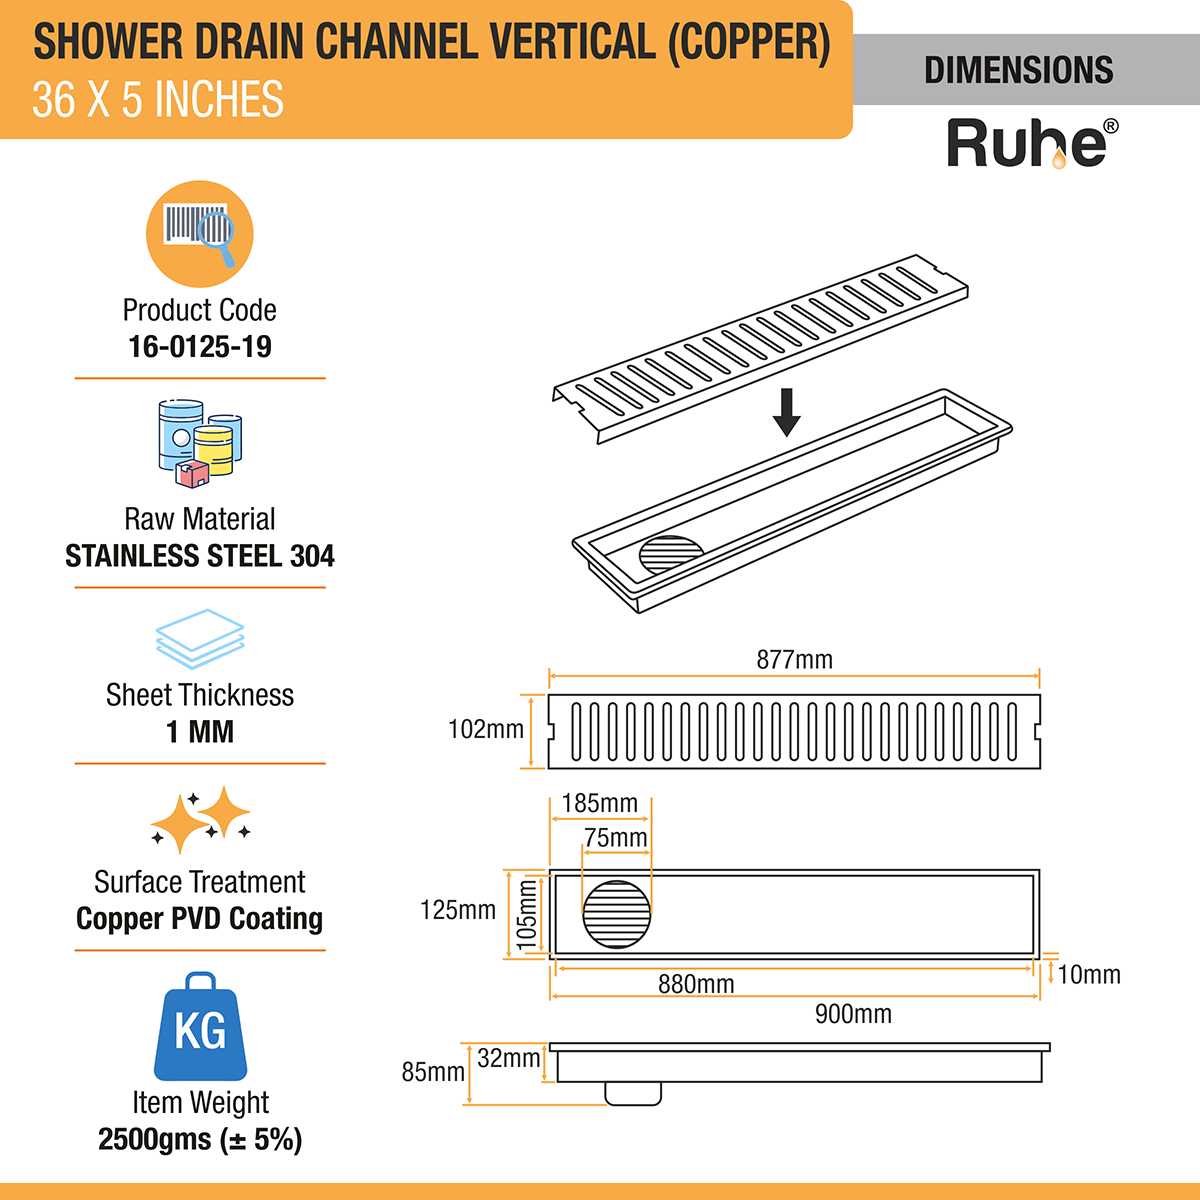 Vertical Shower Drain Channel (36 x 5 Inches) ROSE GOLD/ANTIQUE COPPER dimensions and size